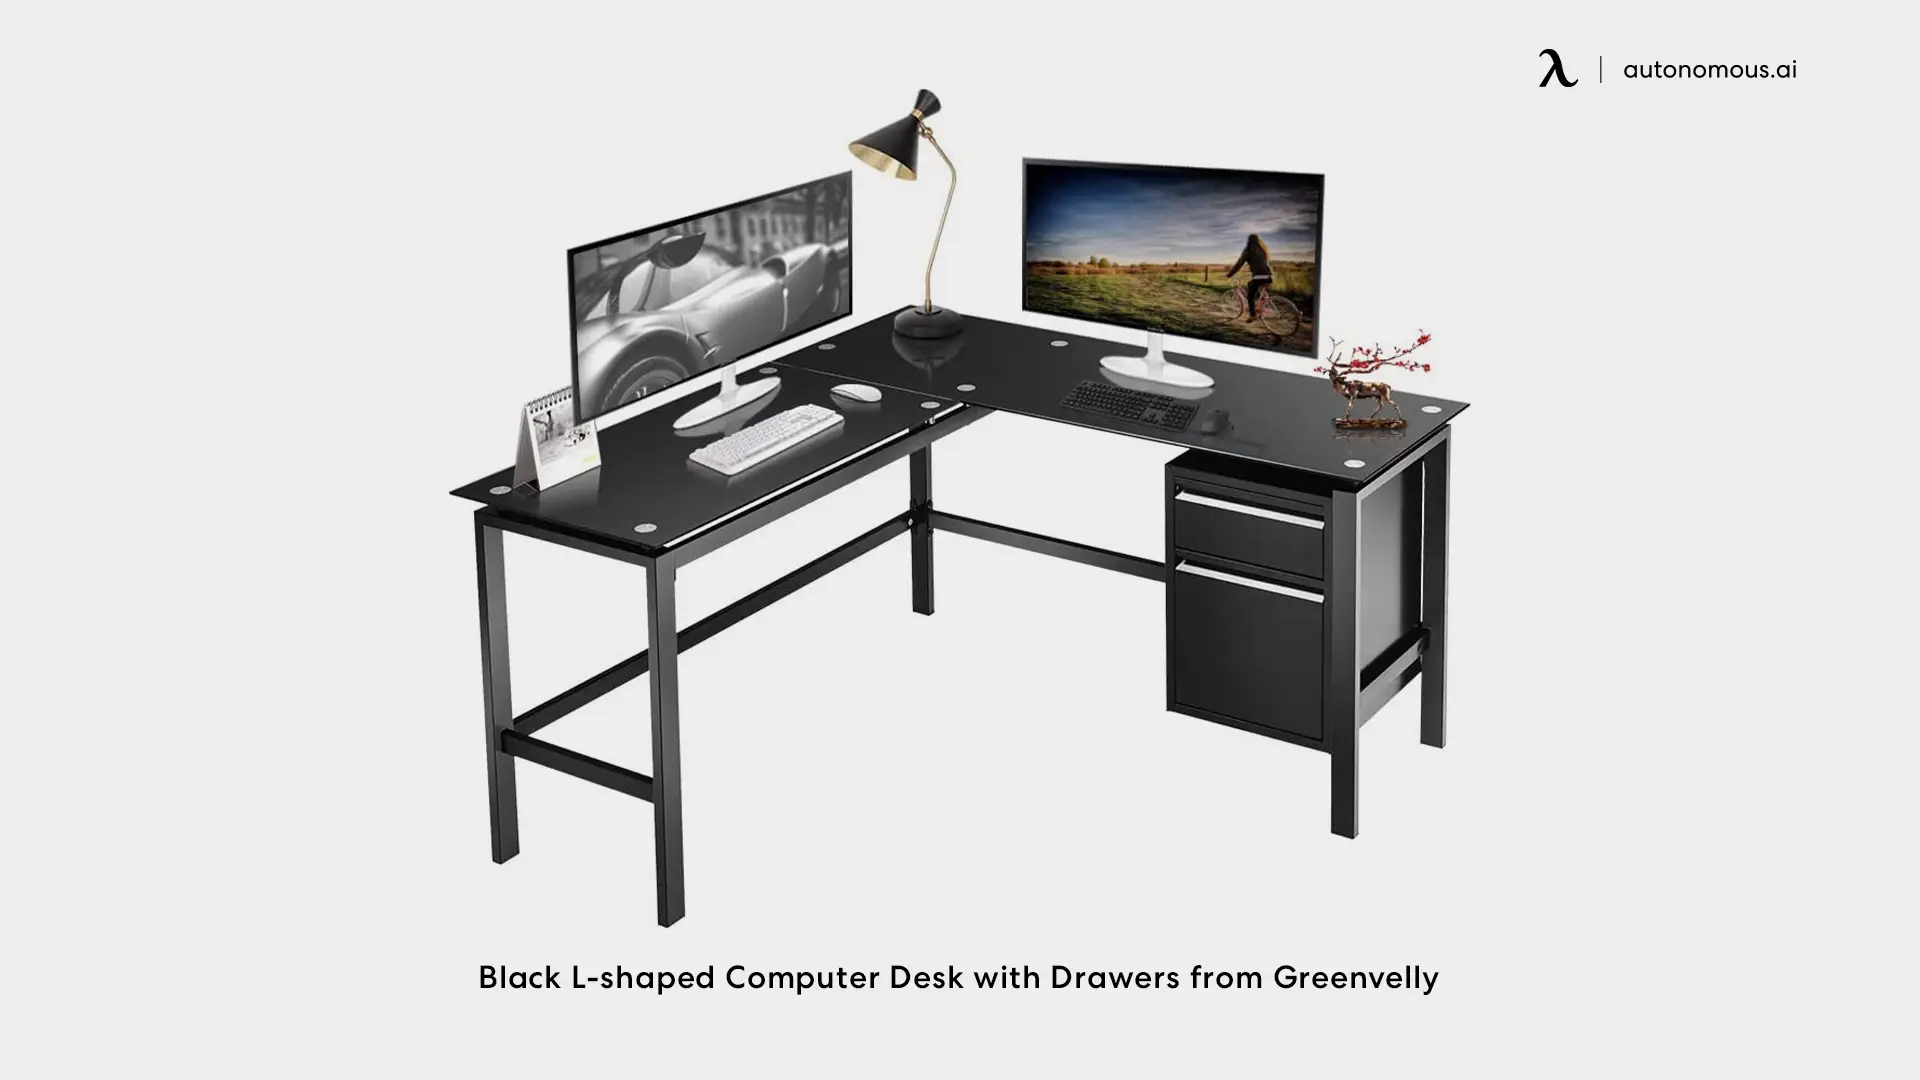 Black L-shaped Computer Desk with Drawers from Greenvelly